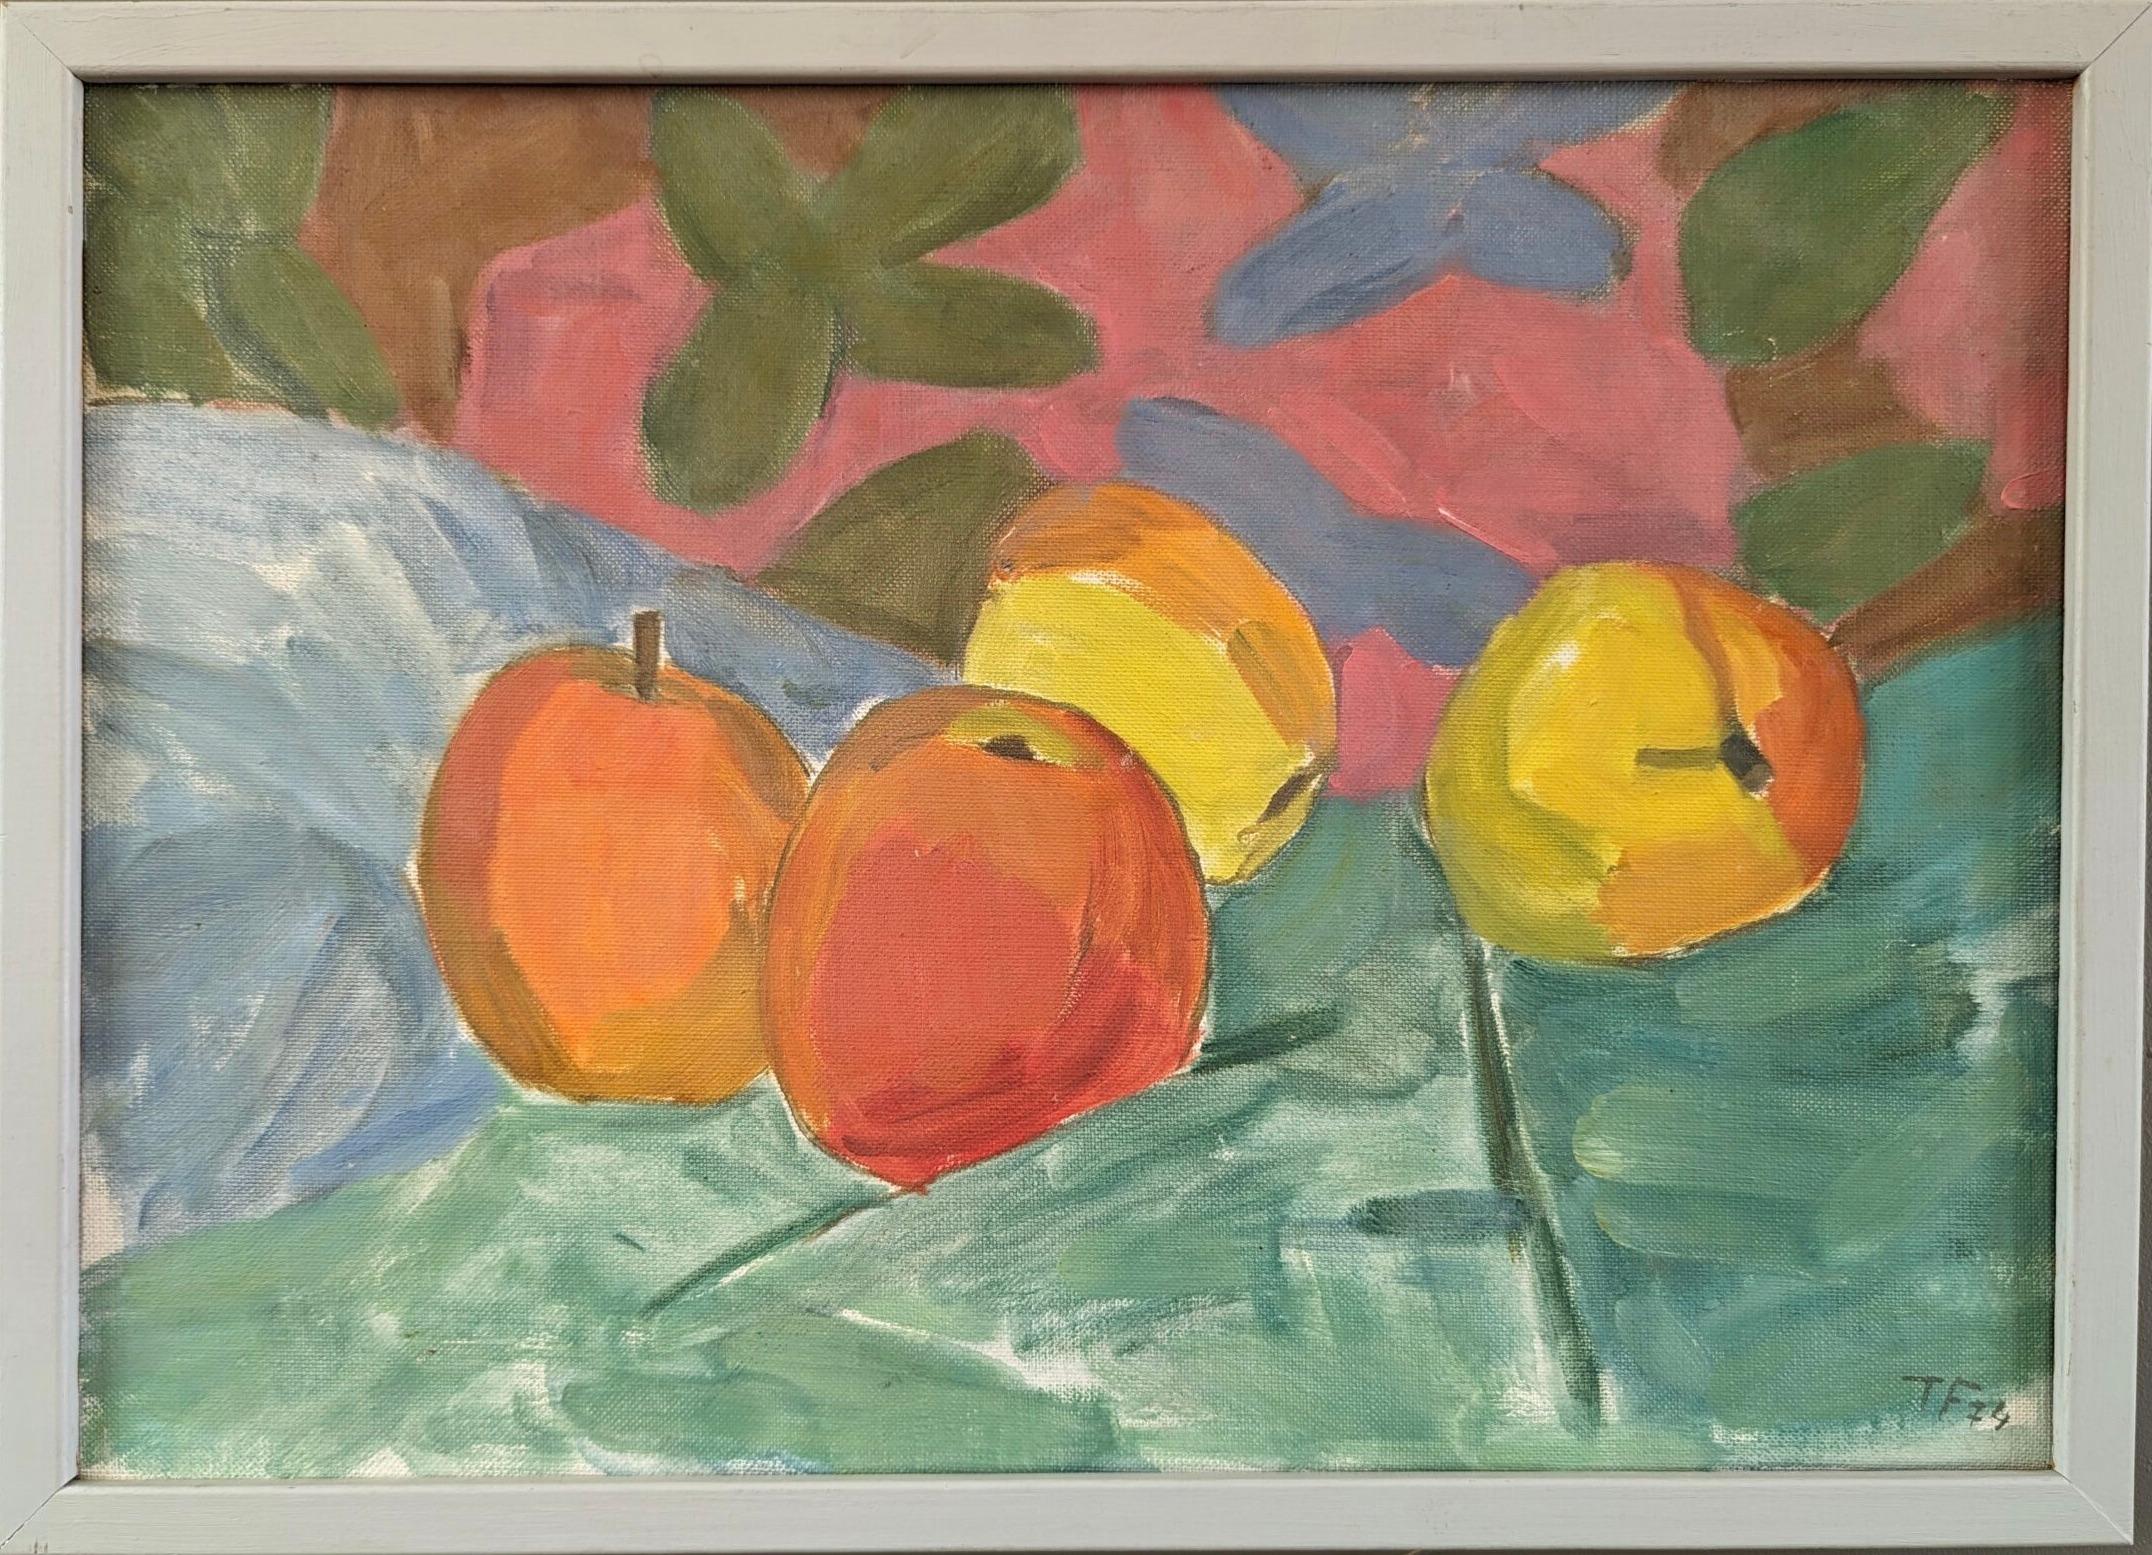 Unknown Still-Life Painting - 1974 Mid-Century Modern Still Life Oil Painting by Ture Fabiansson - Four Apples